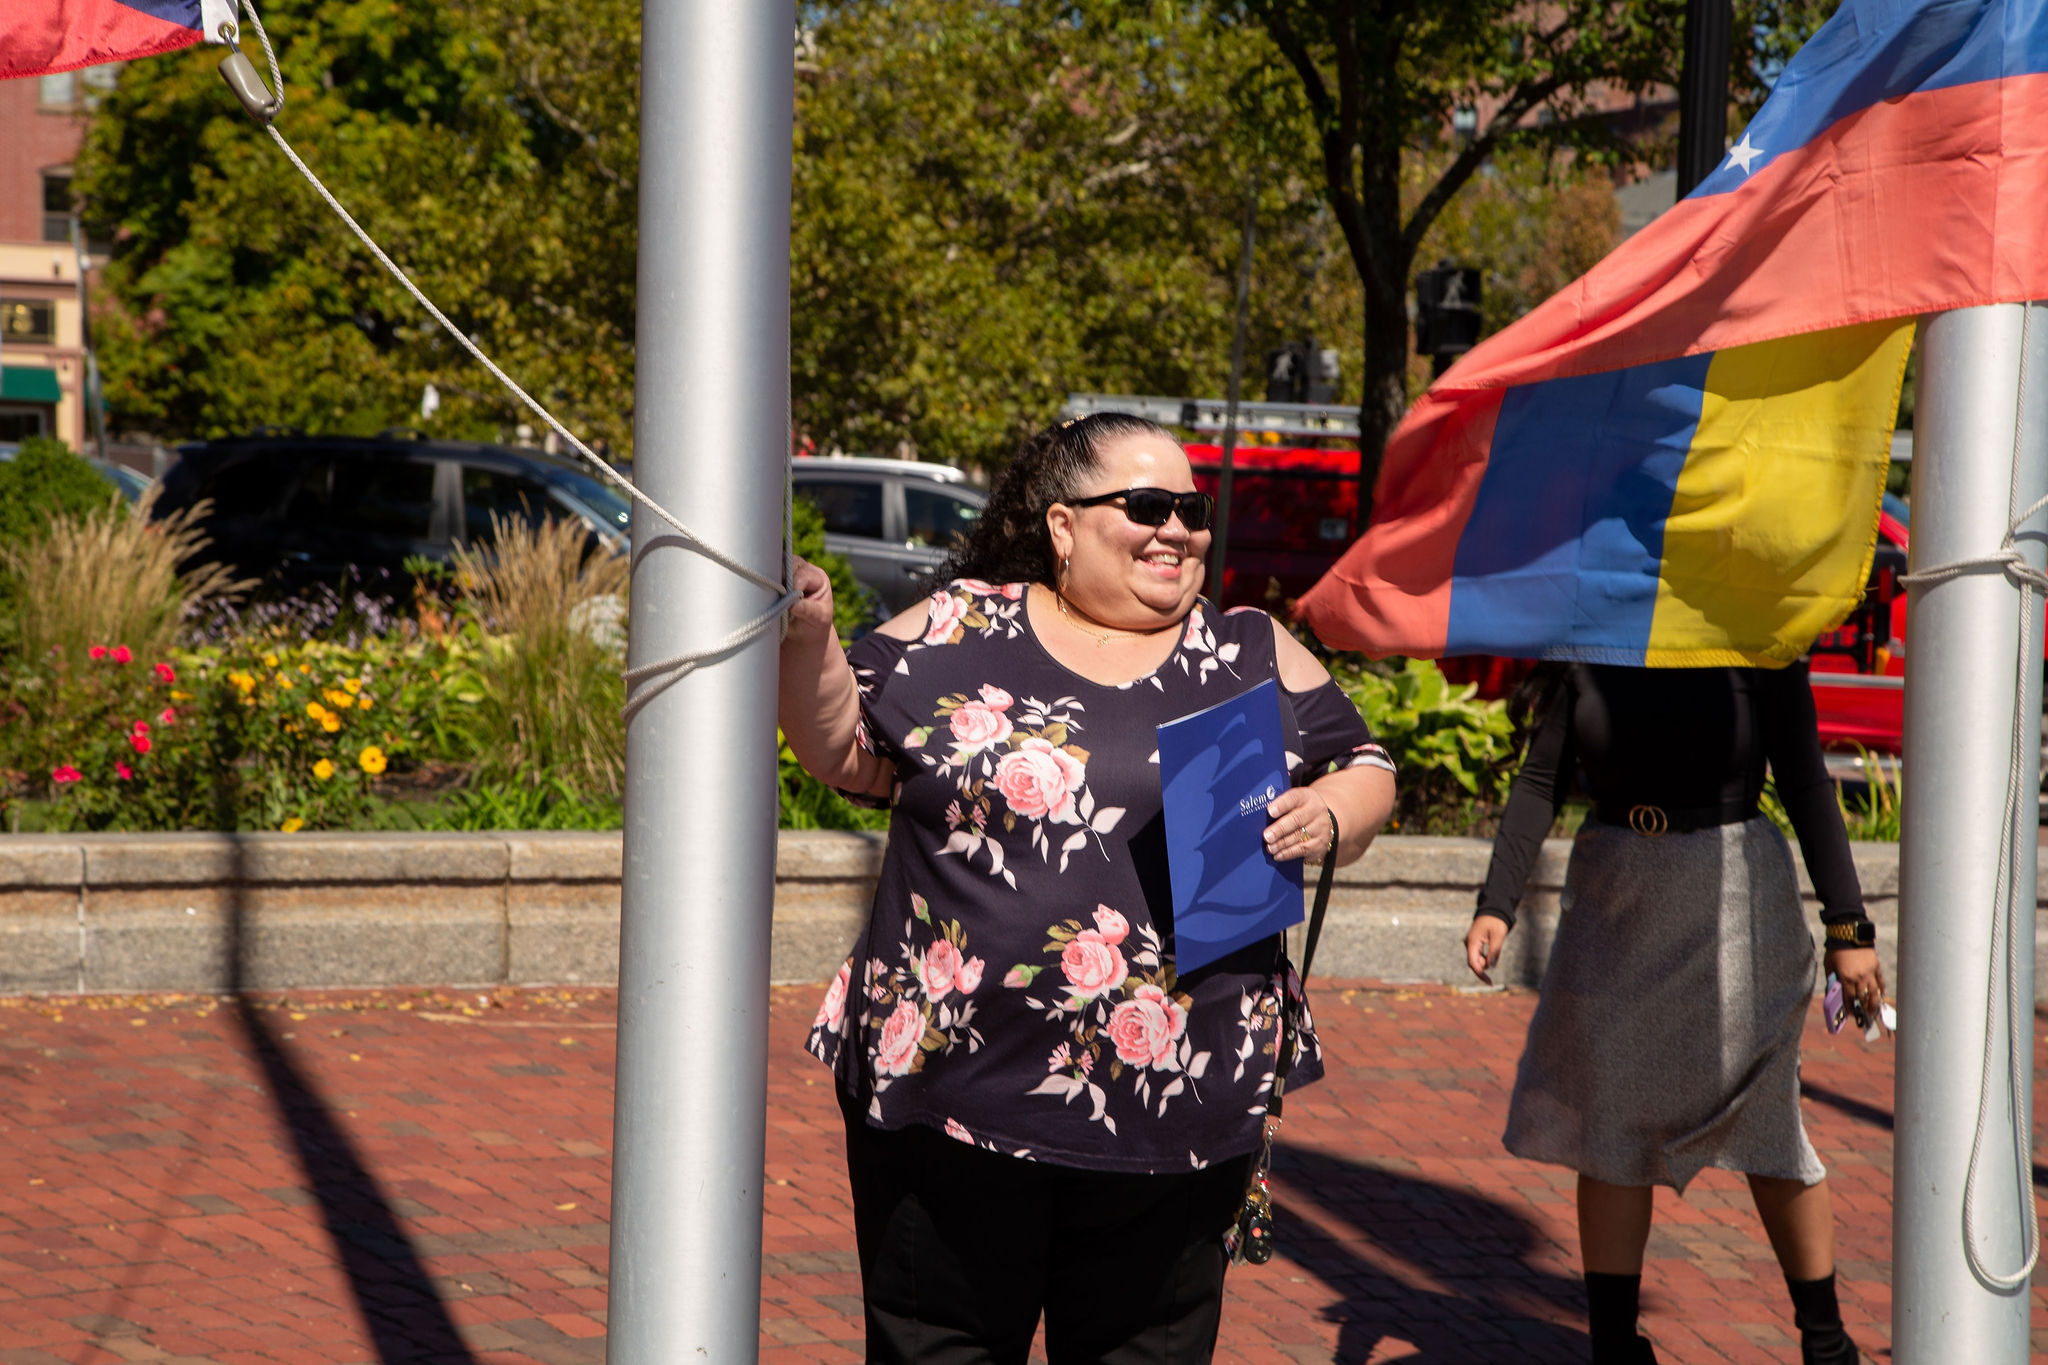 A Latina woman holds the rope holding a flag during the Latinx heritage month flag raising